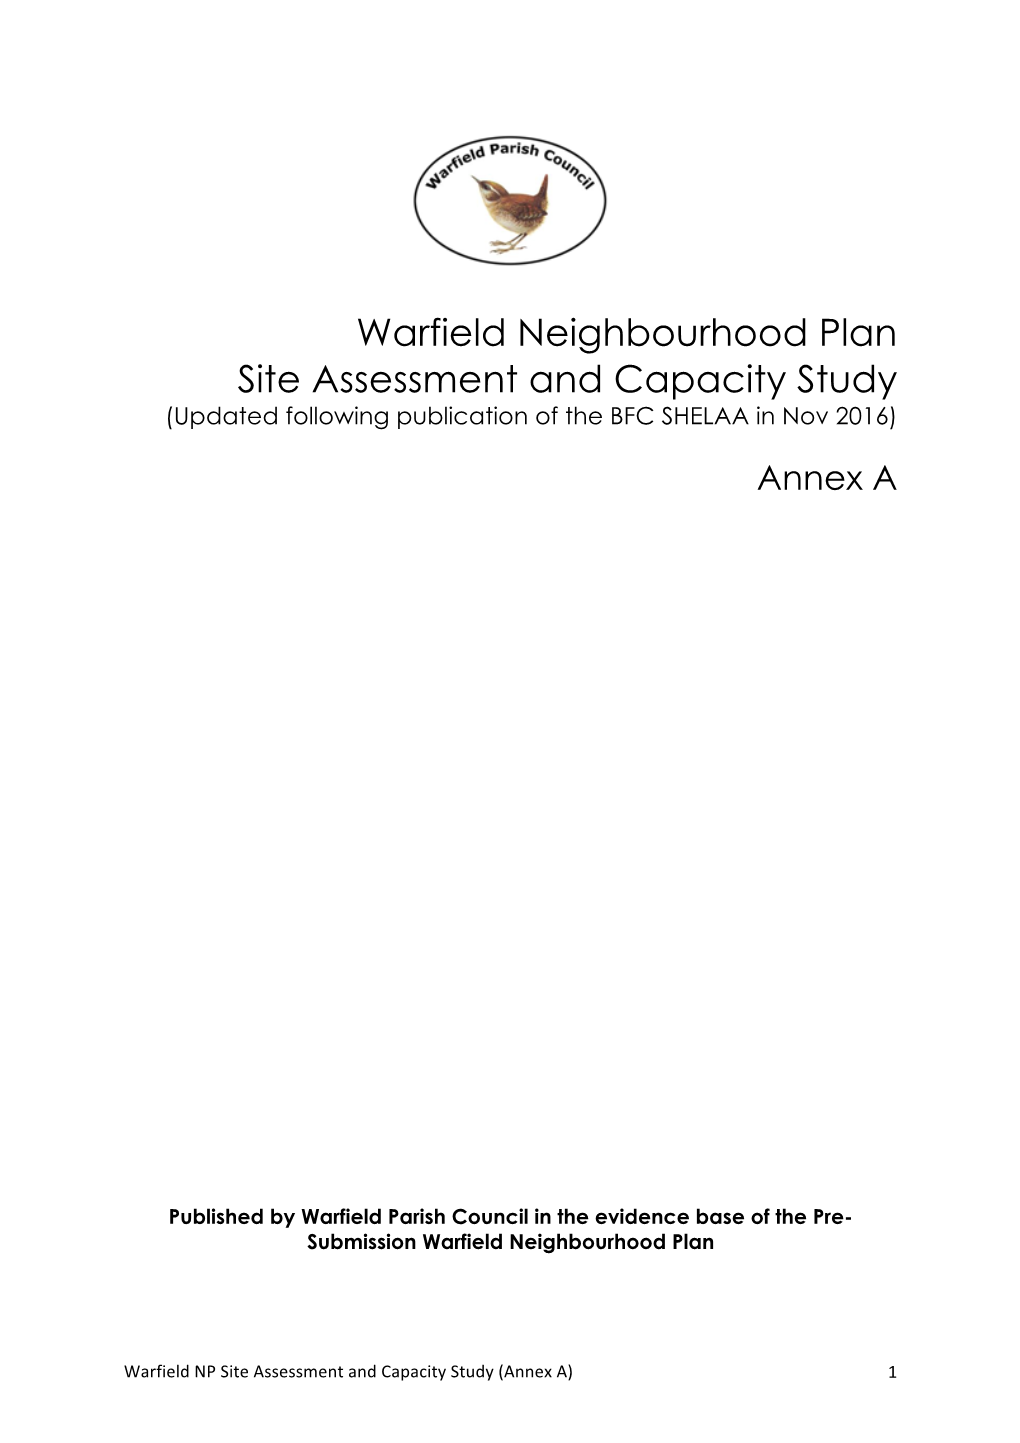 Warfield Neighbourhood Plan Site Assessment and Capacity Study (Updated Following Publication of the BFC SHELAA in Nov 2016)